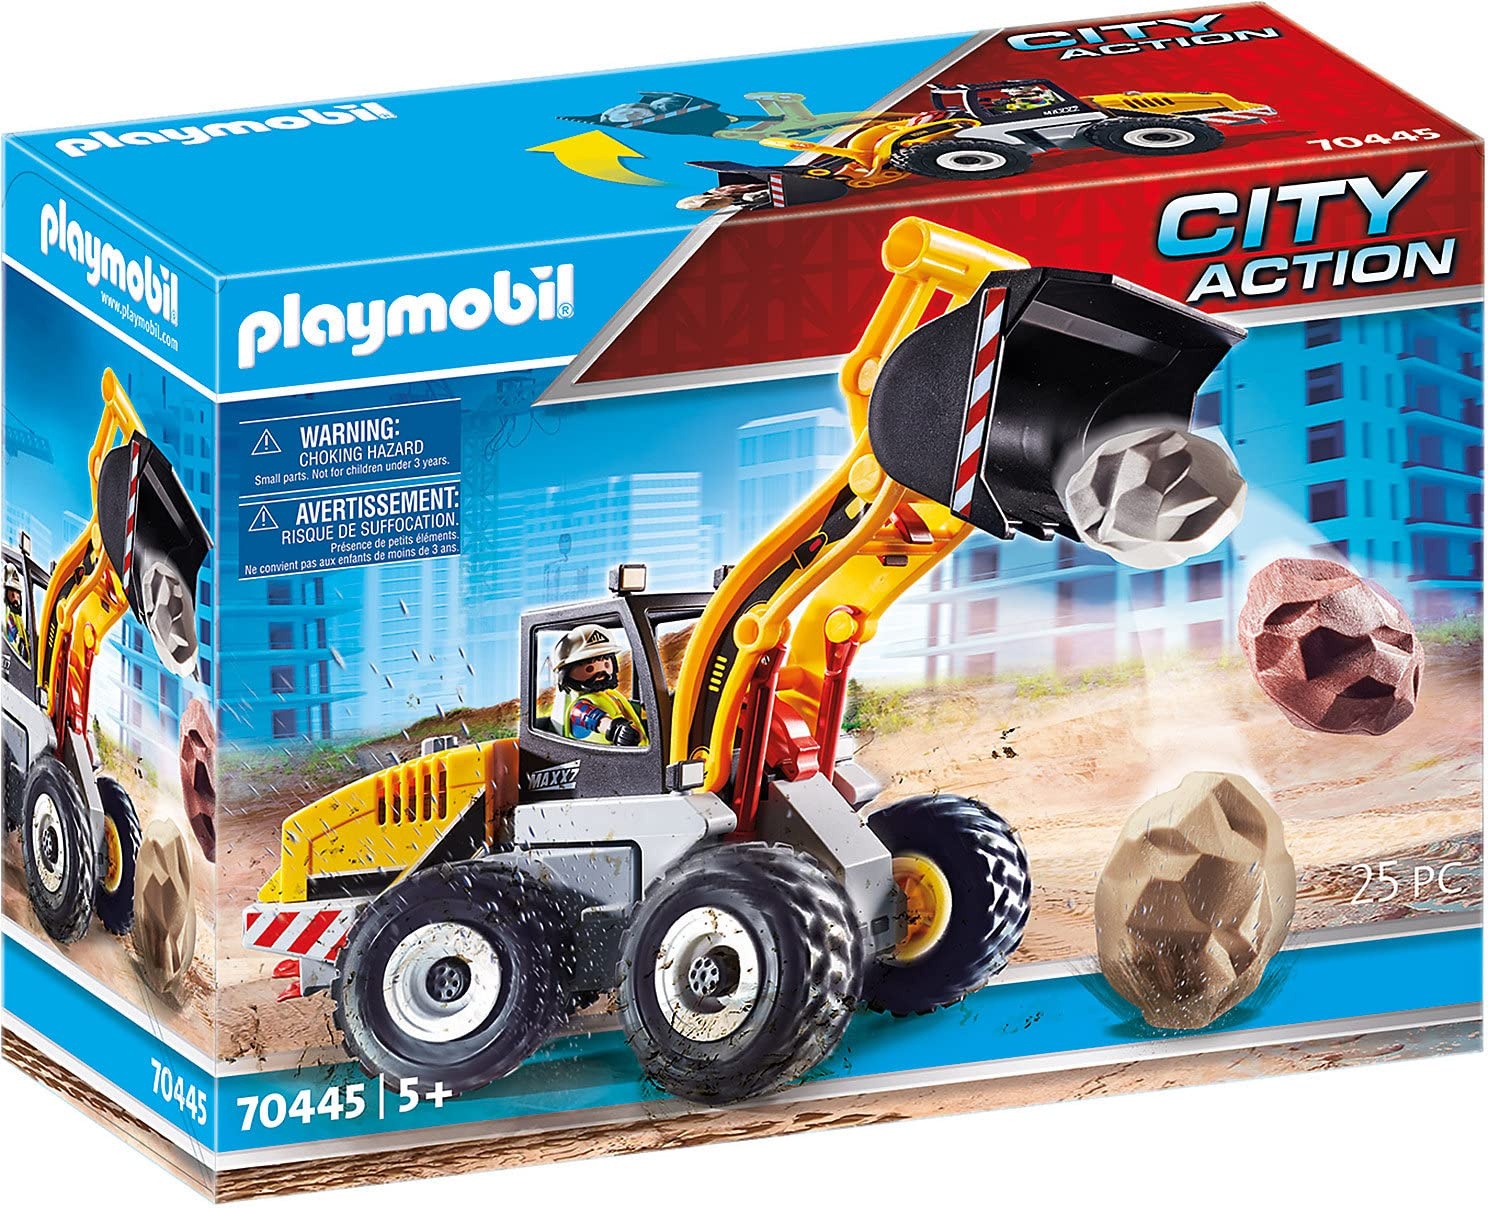 PLAYMOBIL City Action 70445 Construction Front End Loader with Movable Bucket with handle for moving and fixing the shovel, Toy for Children Ages 5+